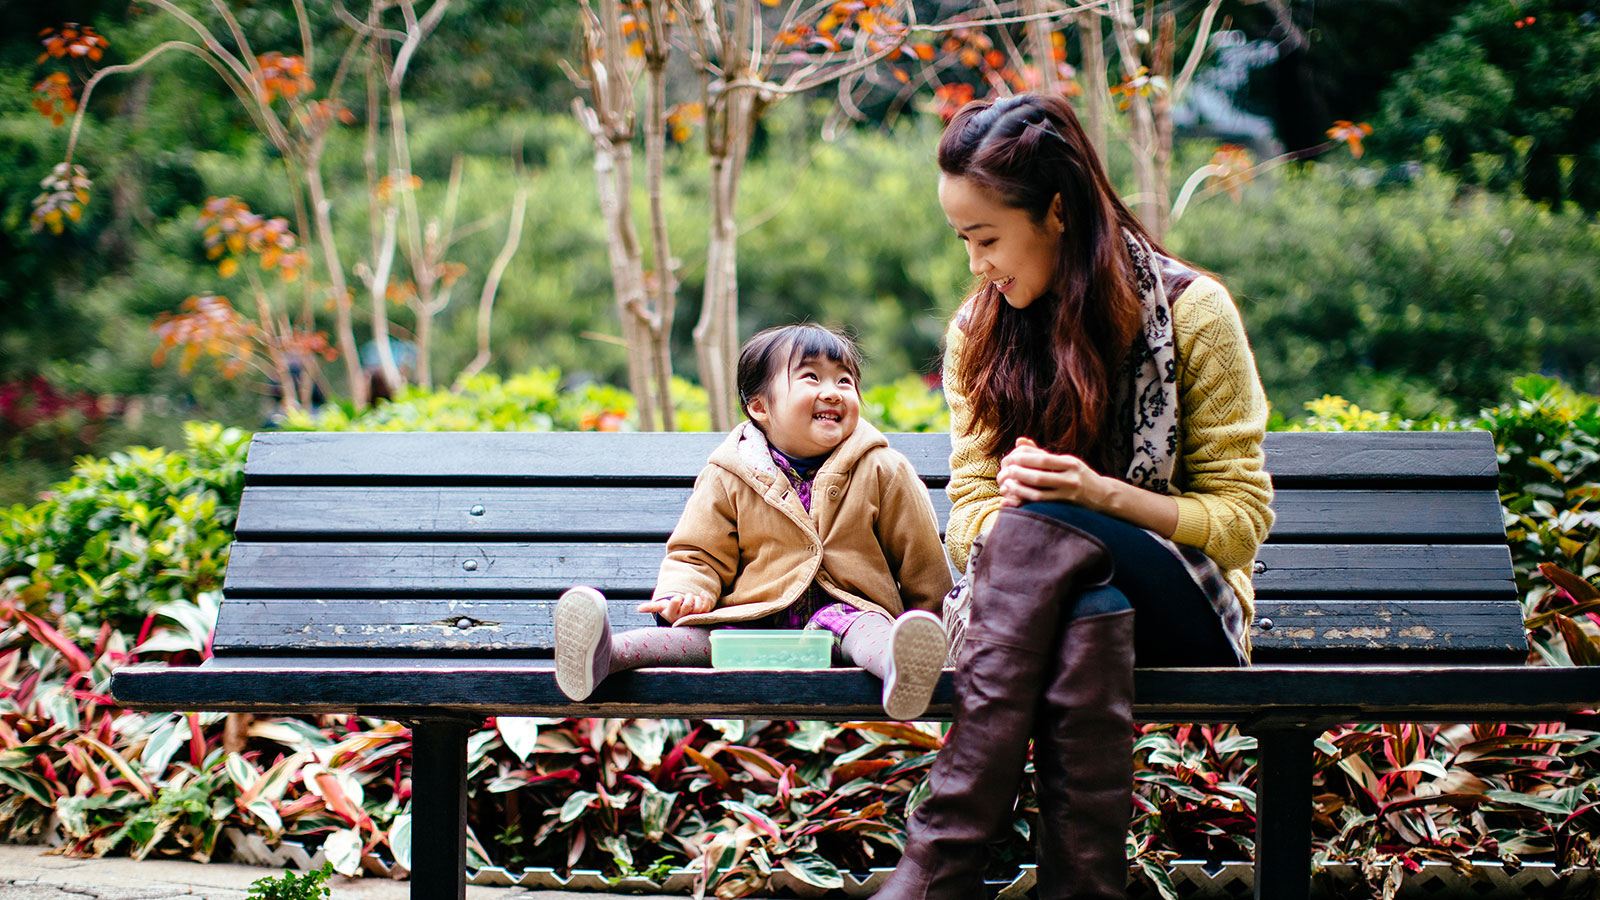 A mother laughs with her young daughter on a park bench